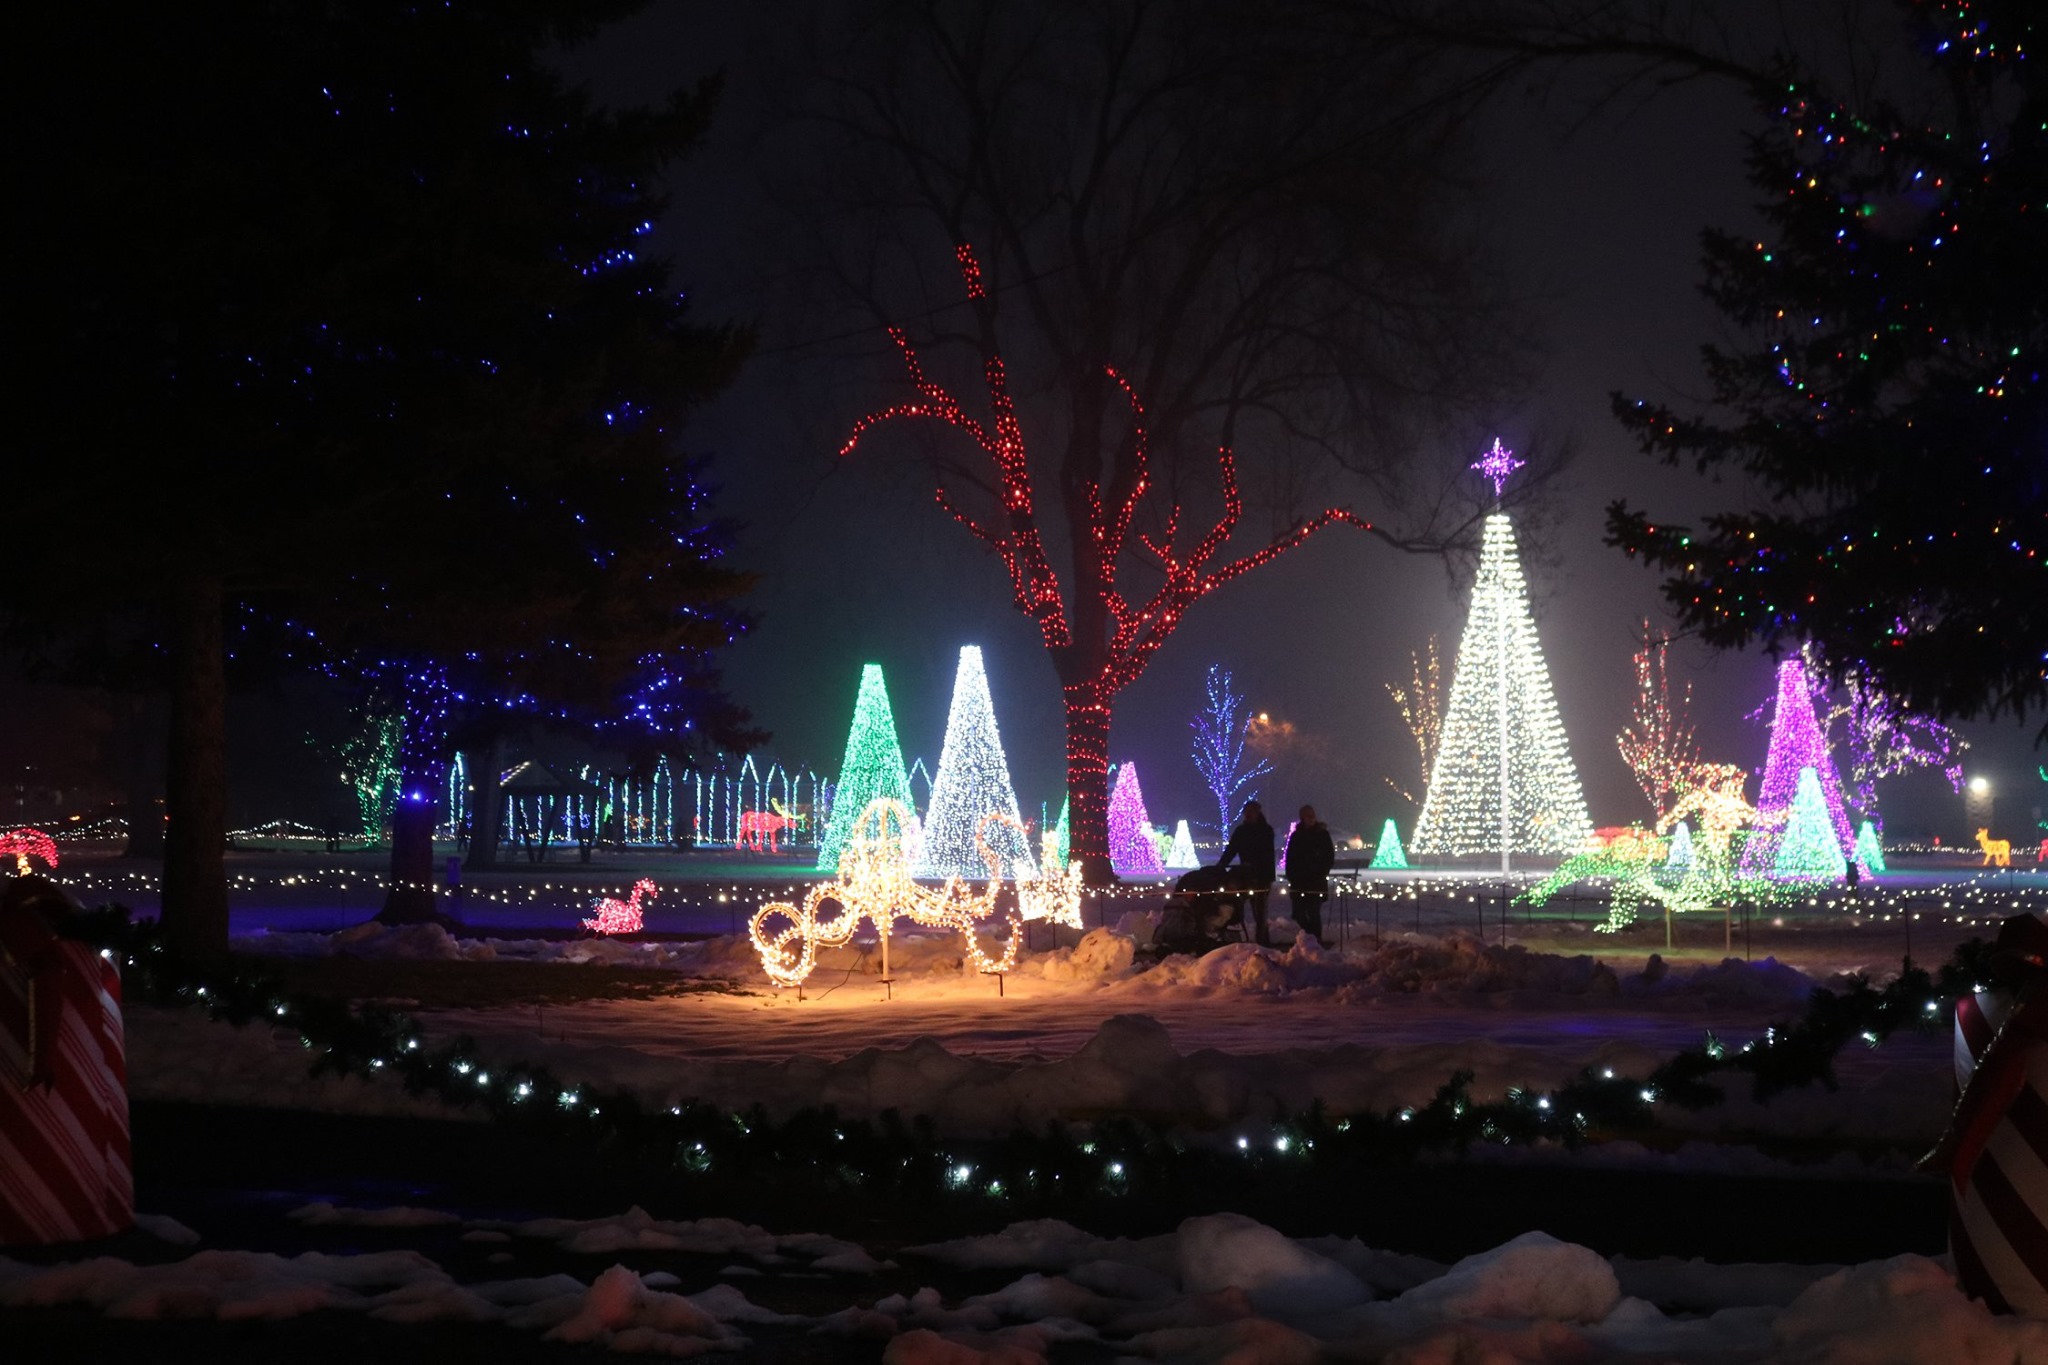 Layton ringing in holiday season with 'Lights Before Christmas' event